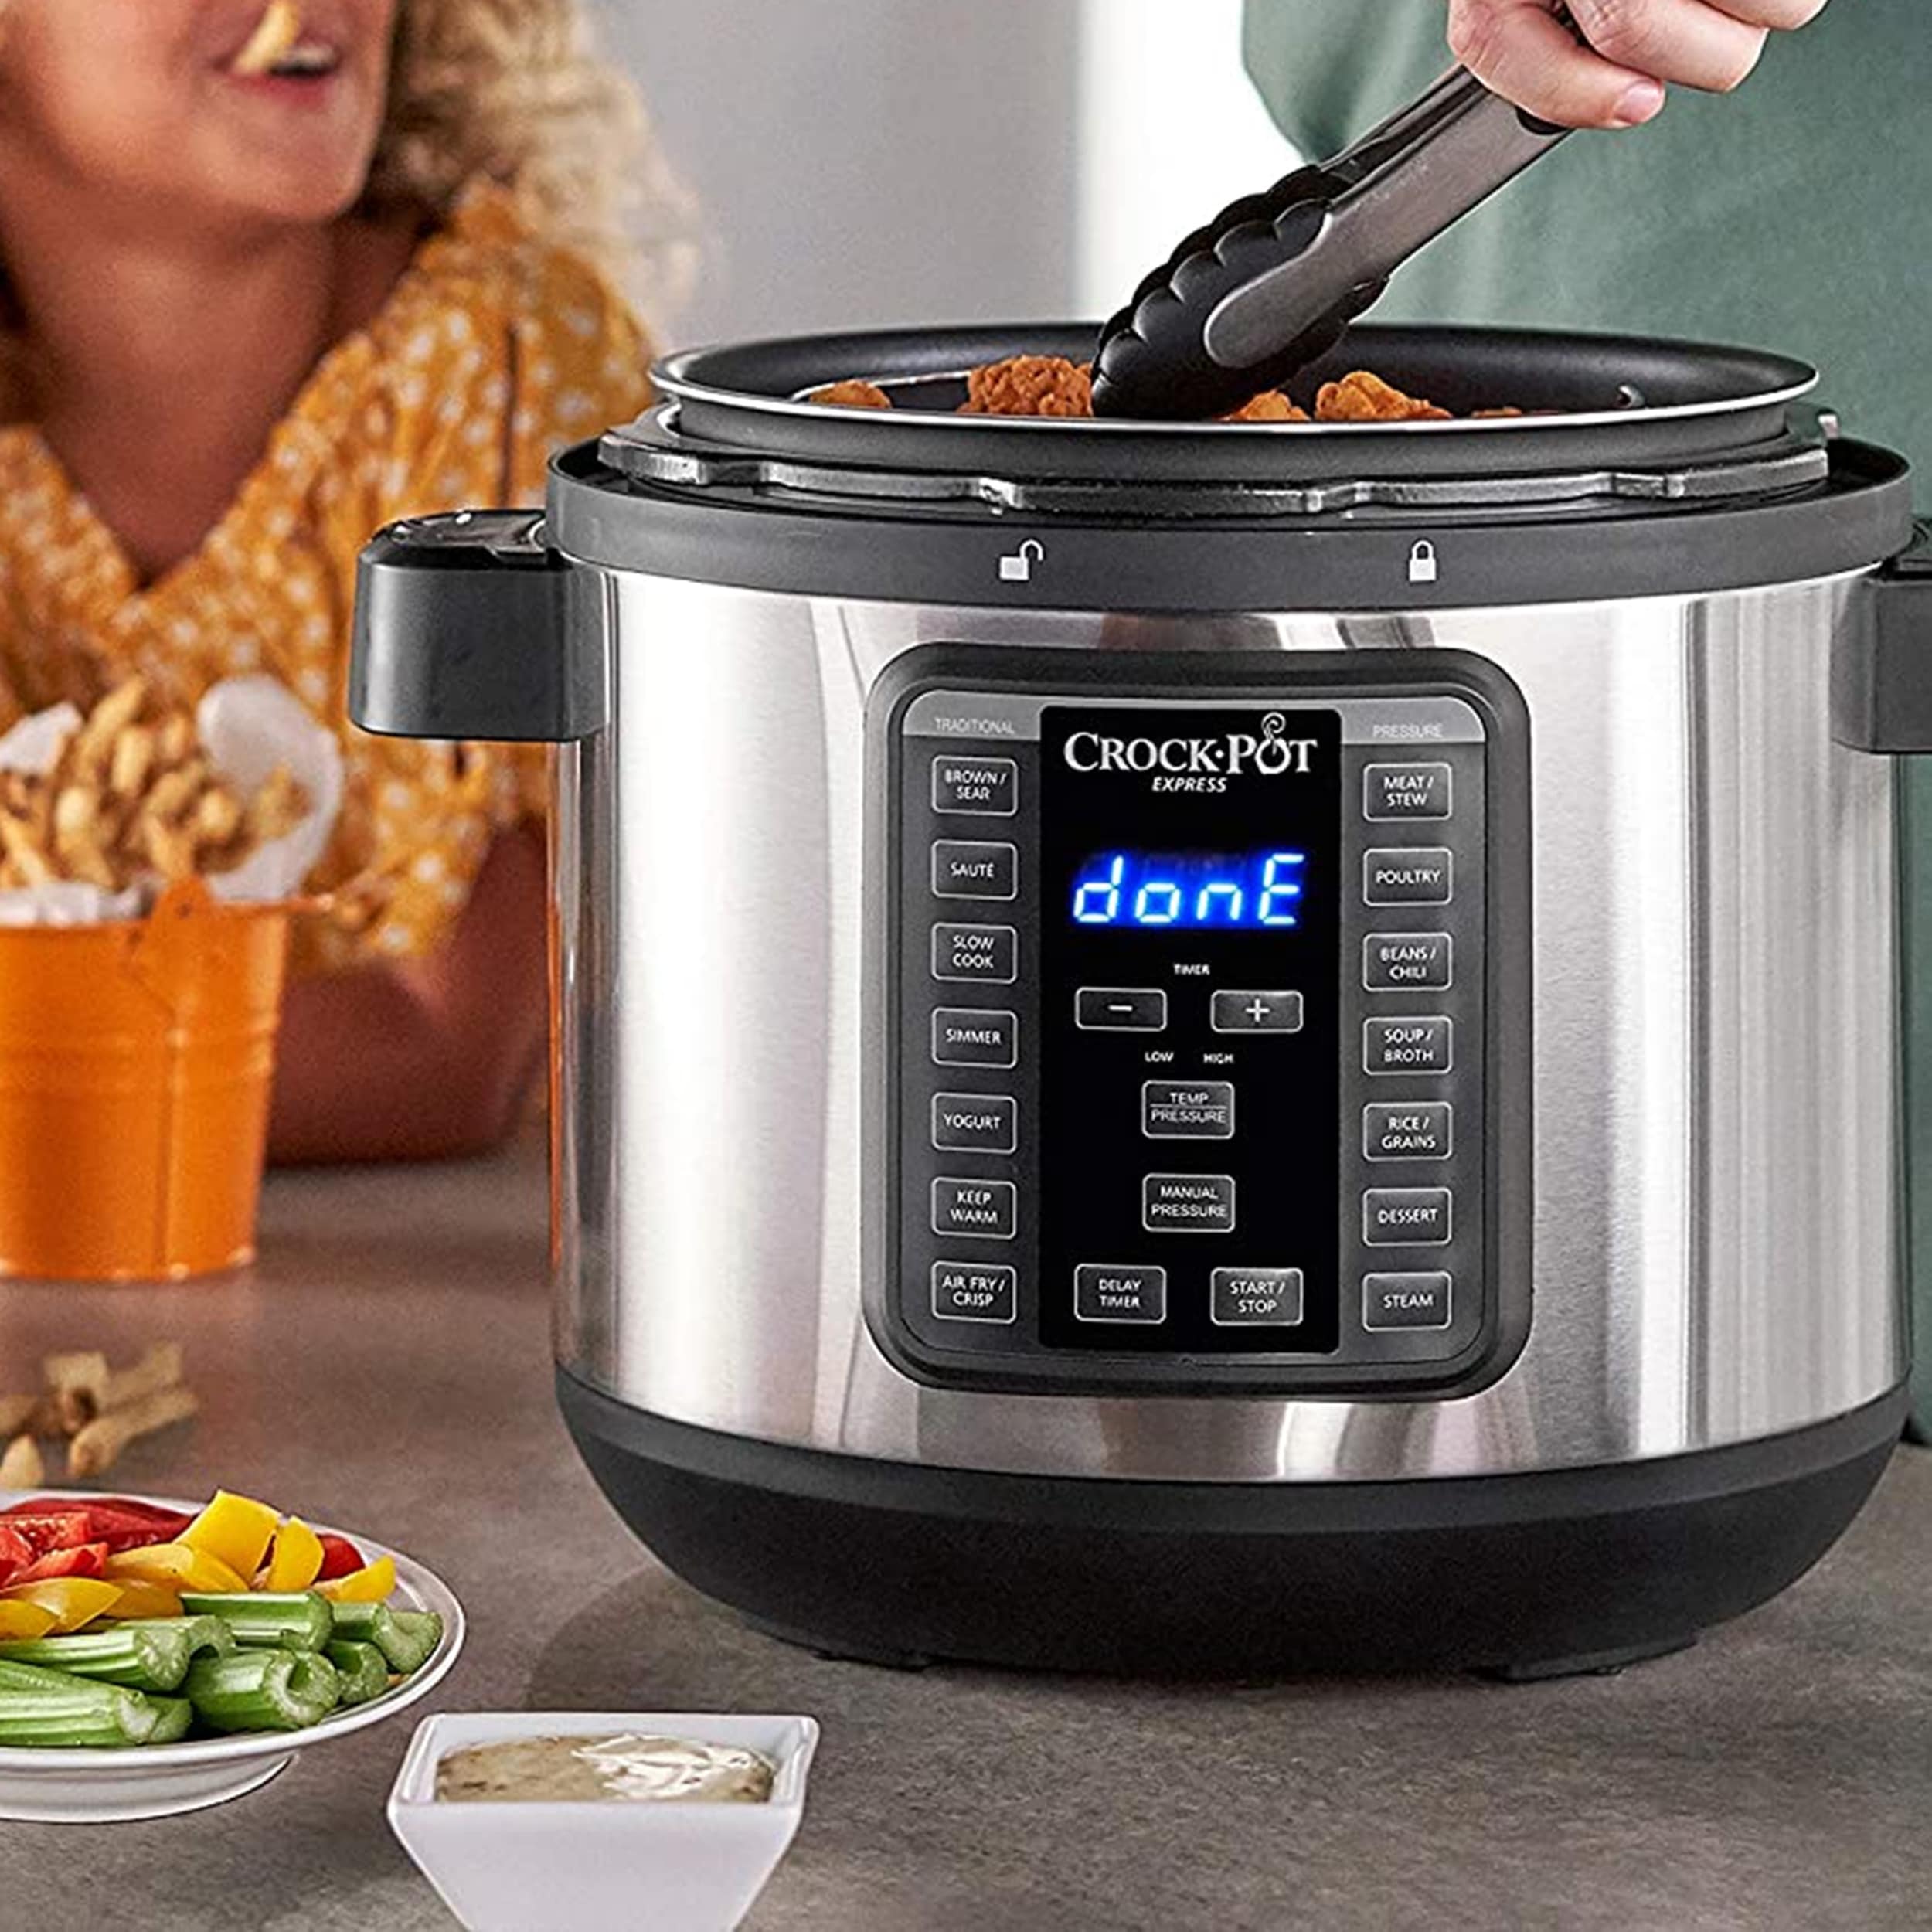  Crock-Pot Small 3.5 Quart Programmable Casserole Slow Cooker  with Timer, Food Warmer, Stainless Steel (SCCPCCP350-SS)